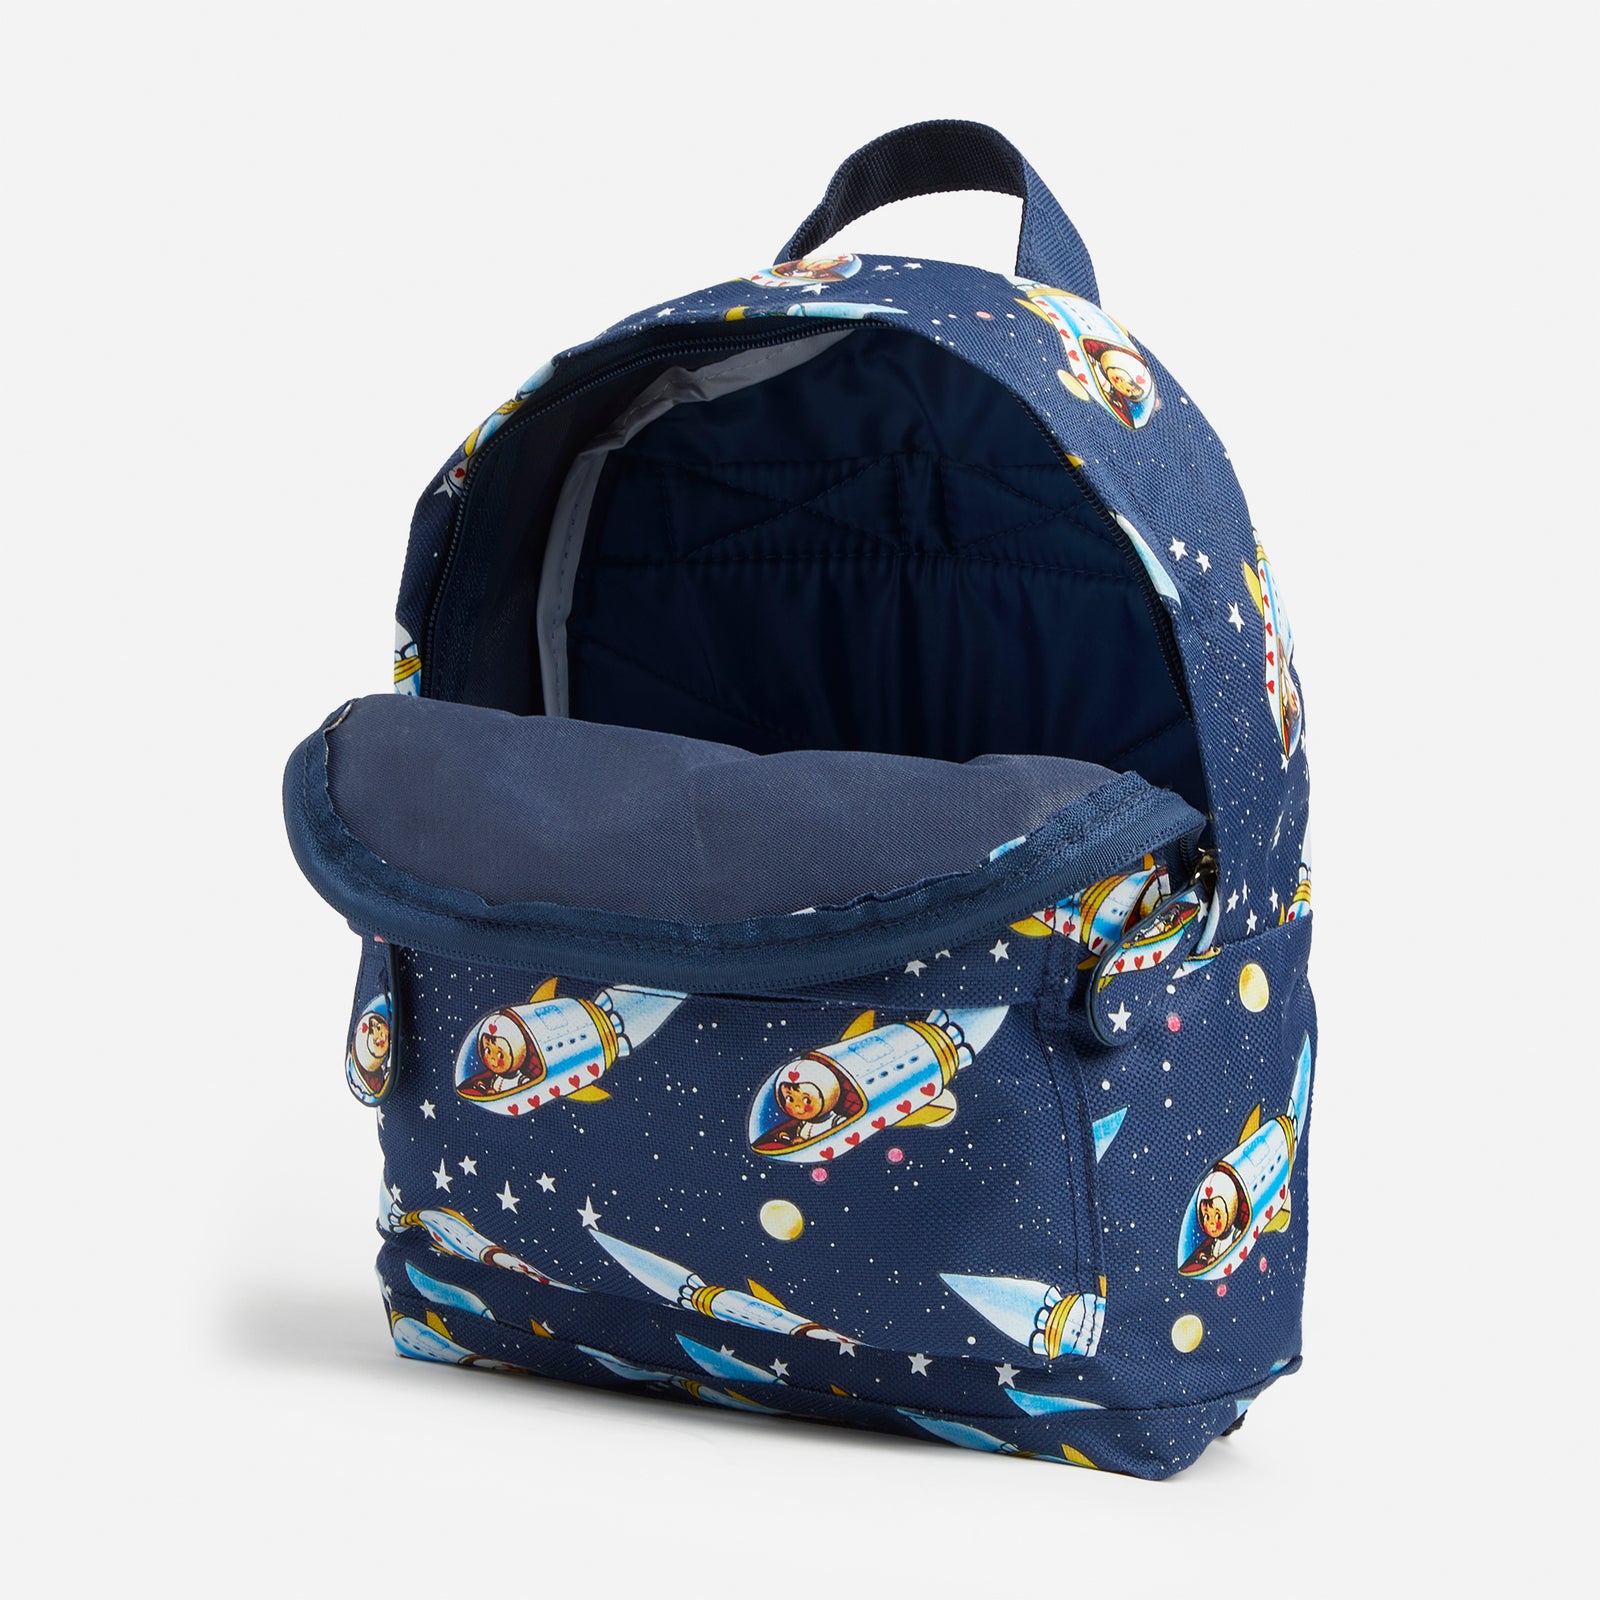 Embroidered Mini Spaceboy Backpack